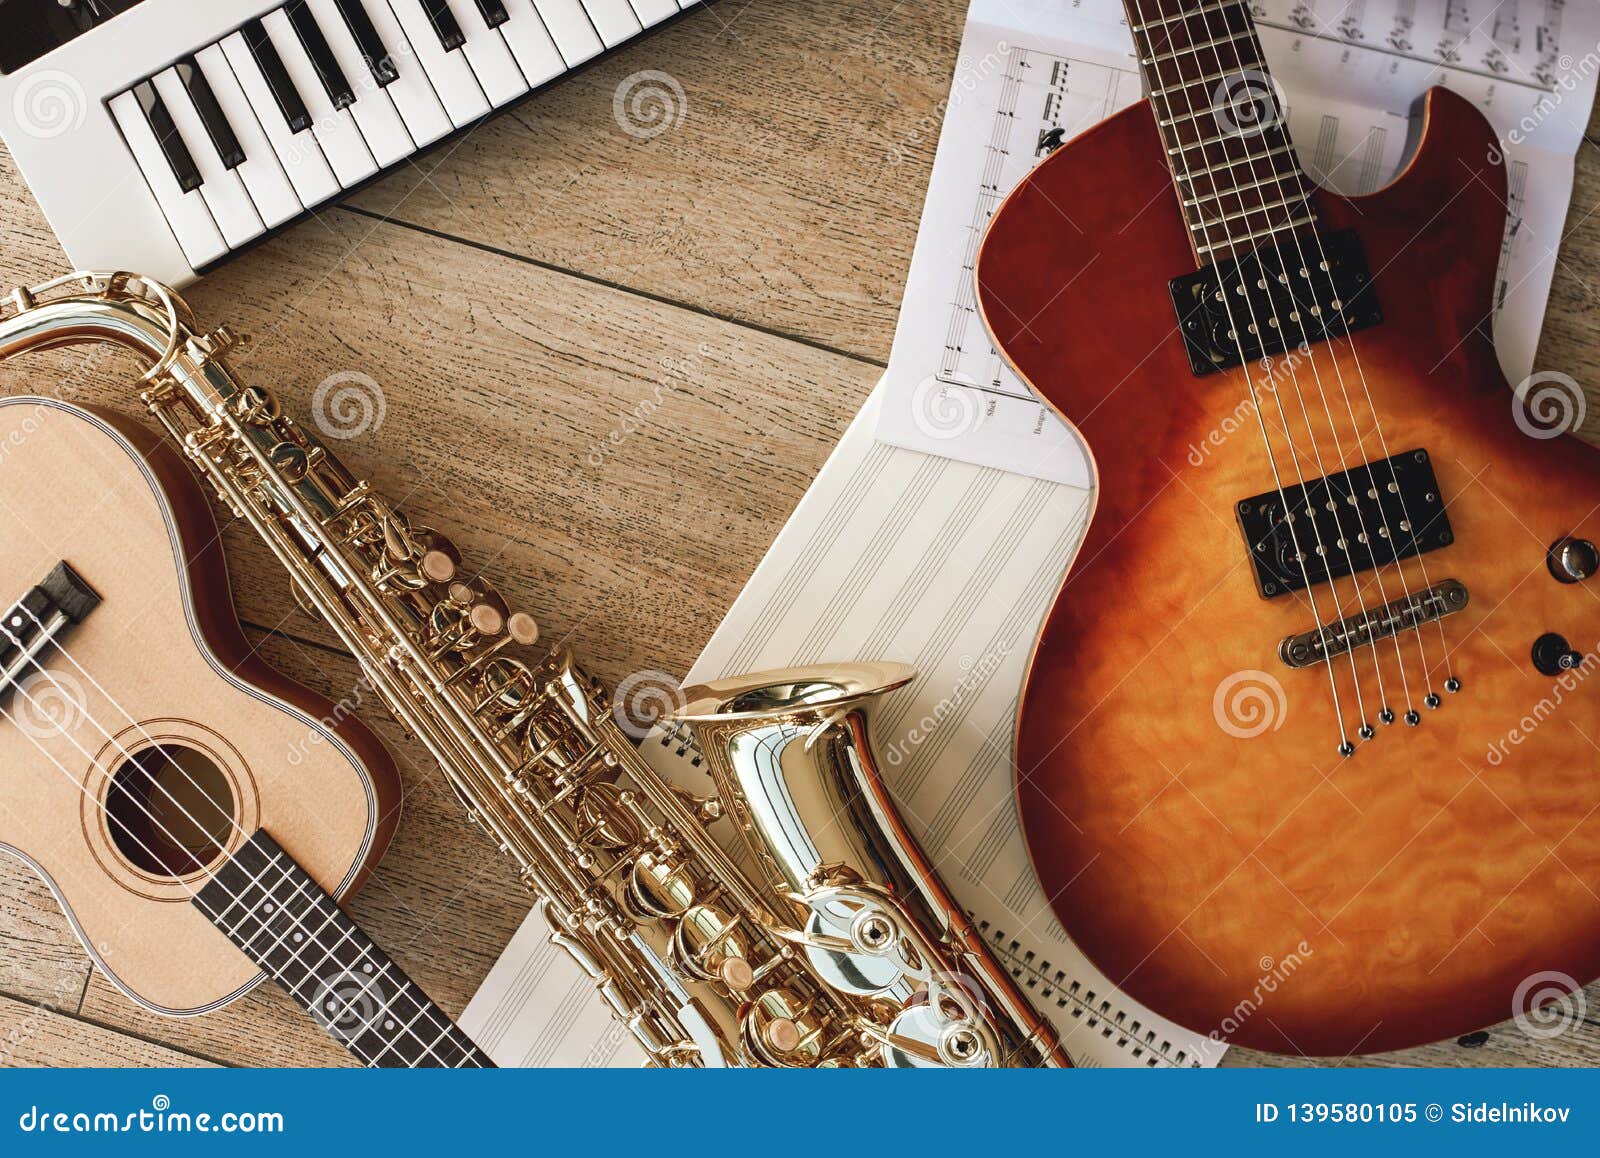 Composition of Different Musical Instruments: Synthesizer, Electronic  Guitar, Saxophone and Ukulele Lying, Sheets with Stock Image - Image of  musician, percussion: 139580105